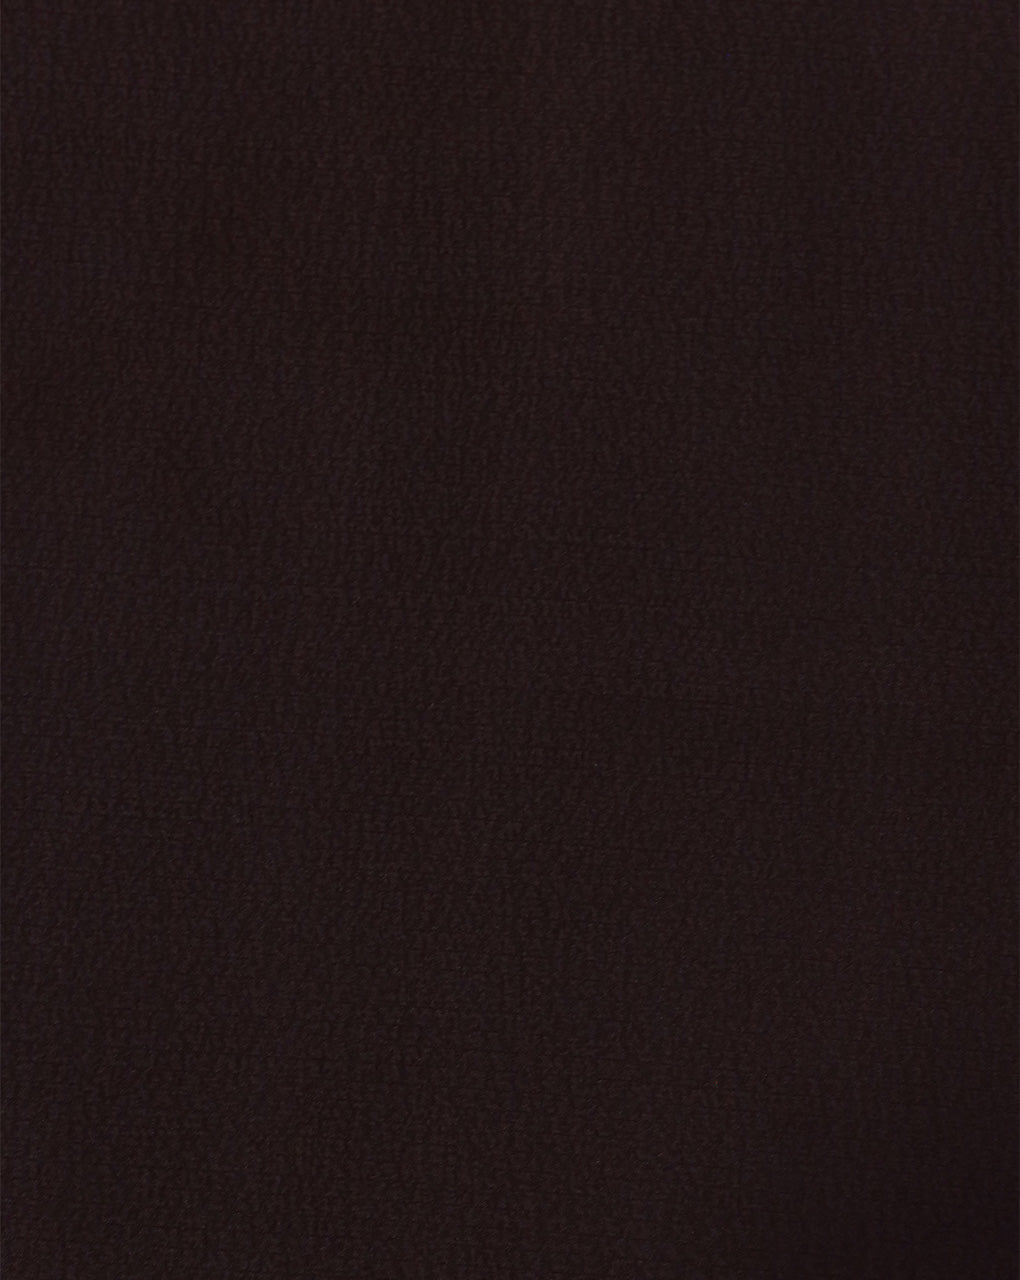 CHOCOLATE BROWN BUBBLE CREPE FABRIC